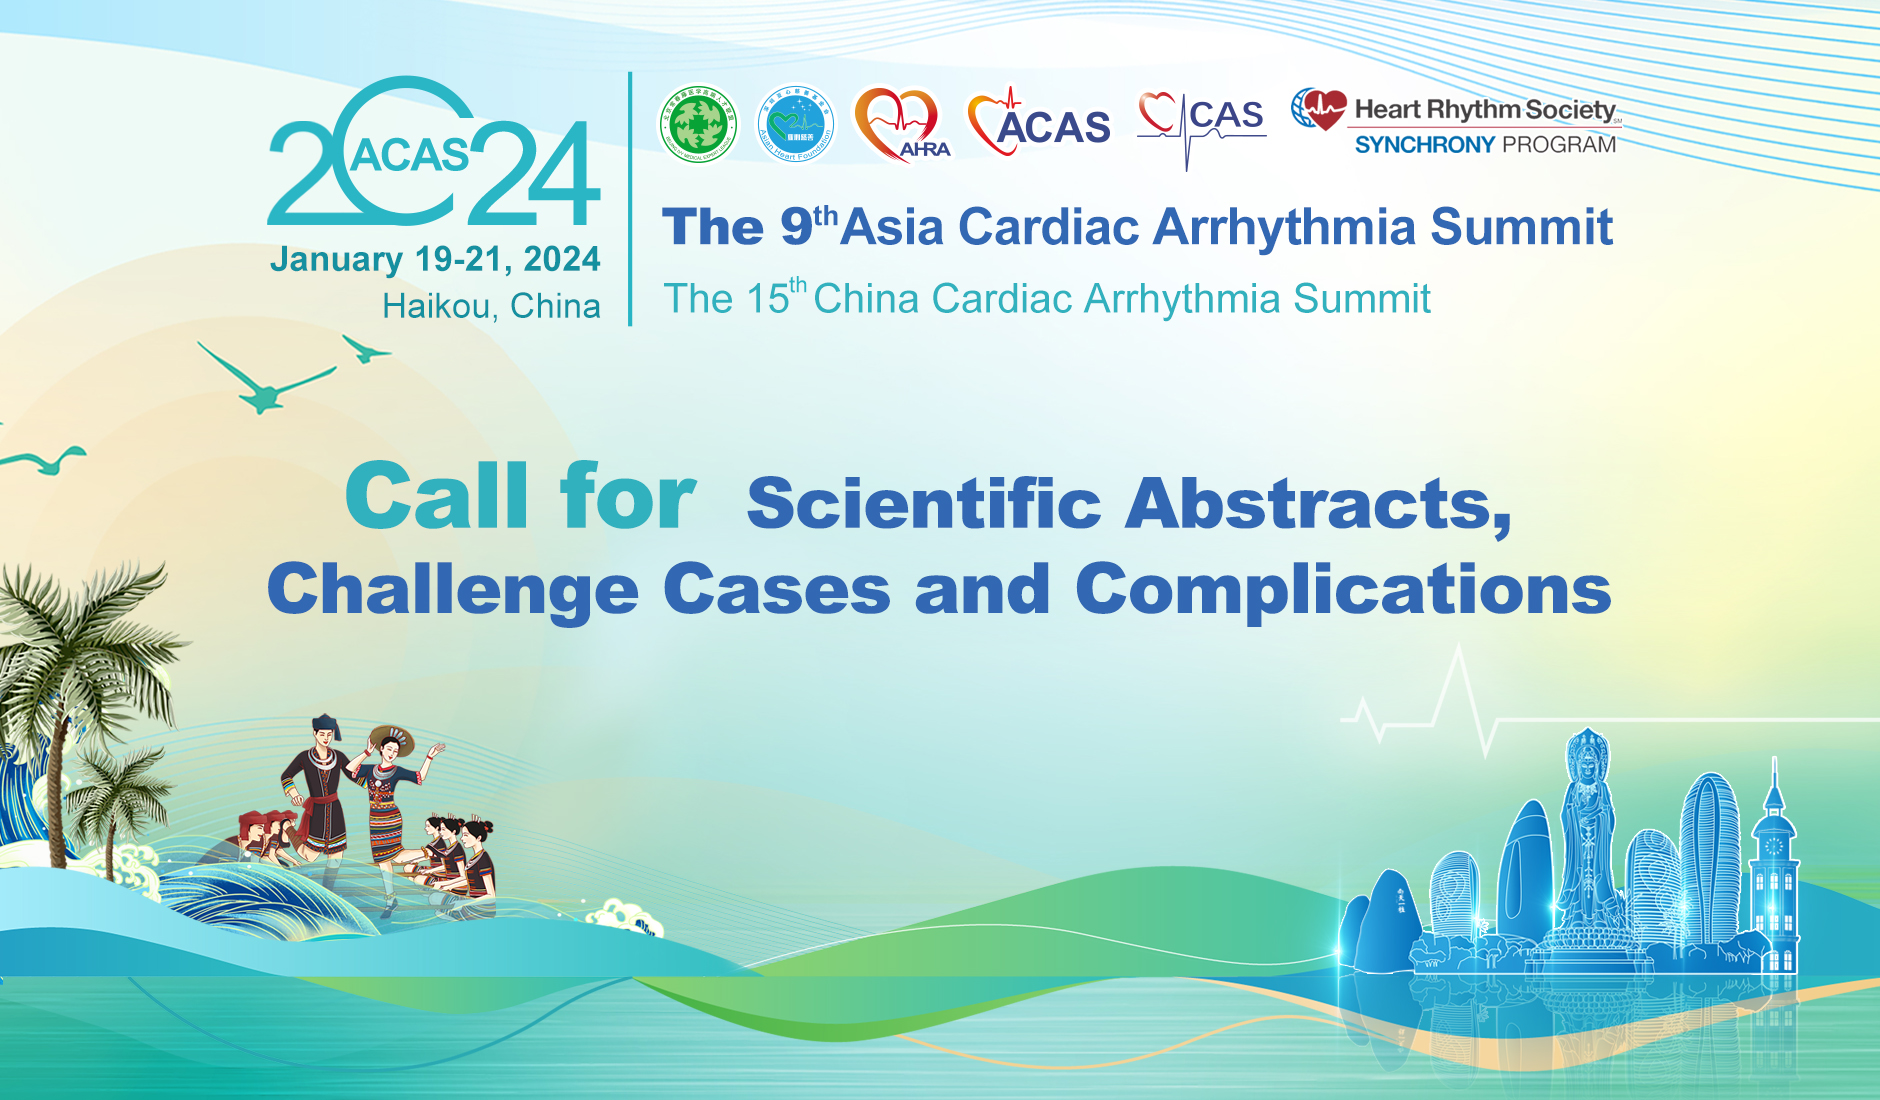 Call for Scientific Abstracts,Challenge Cases and Complications